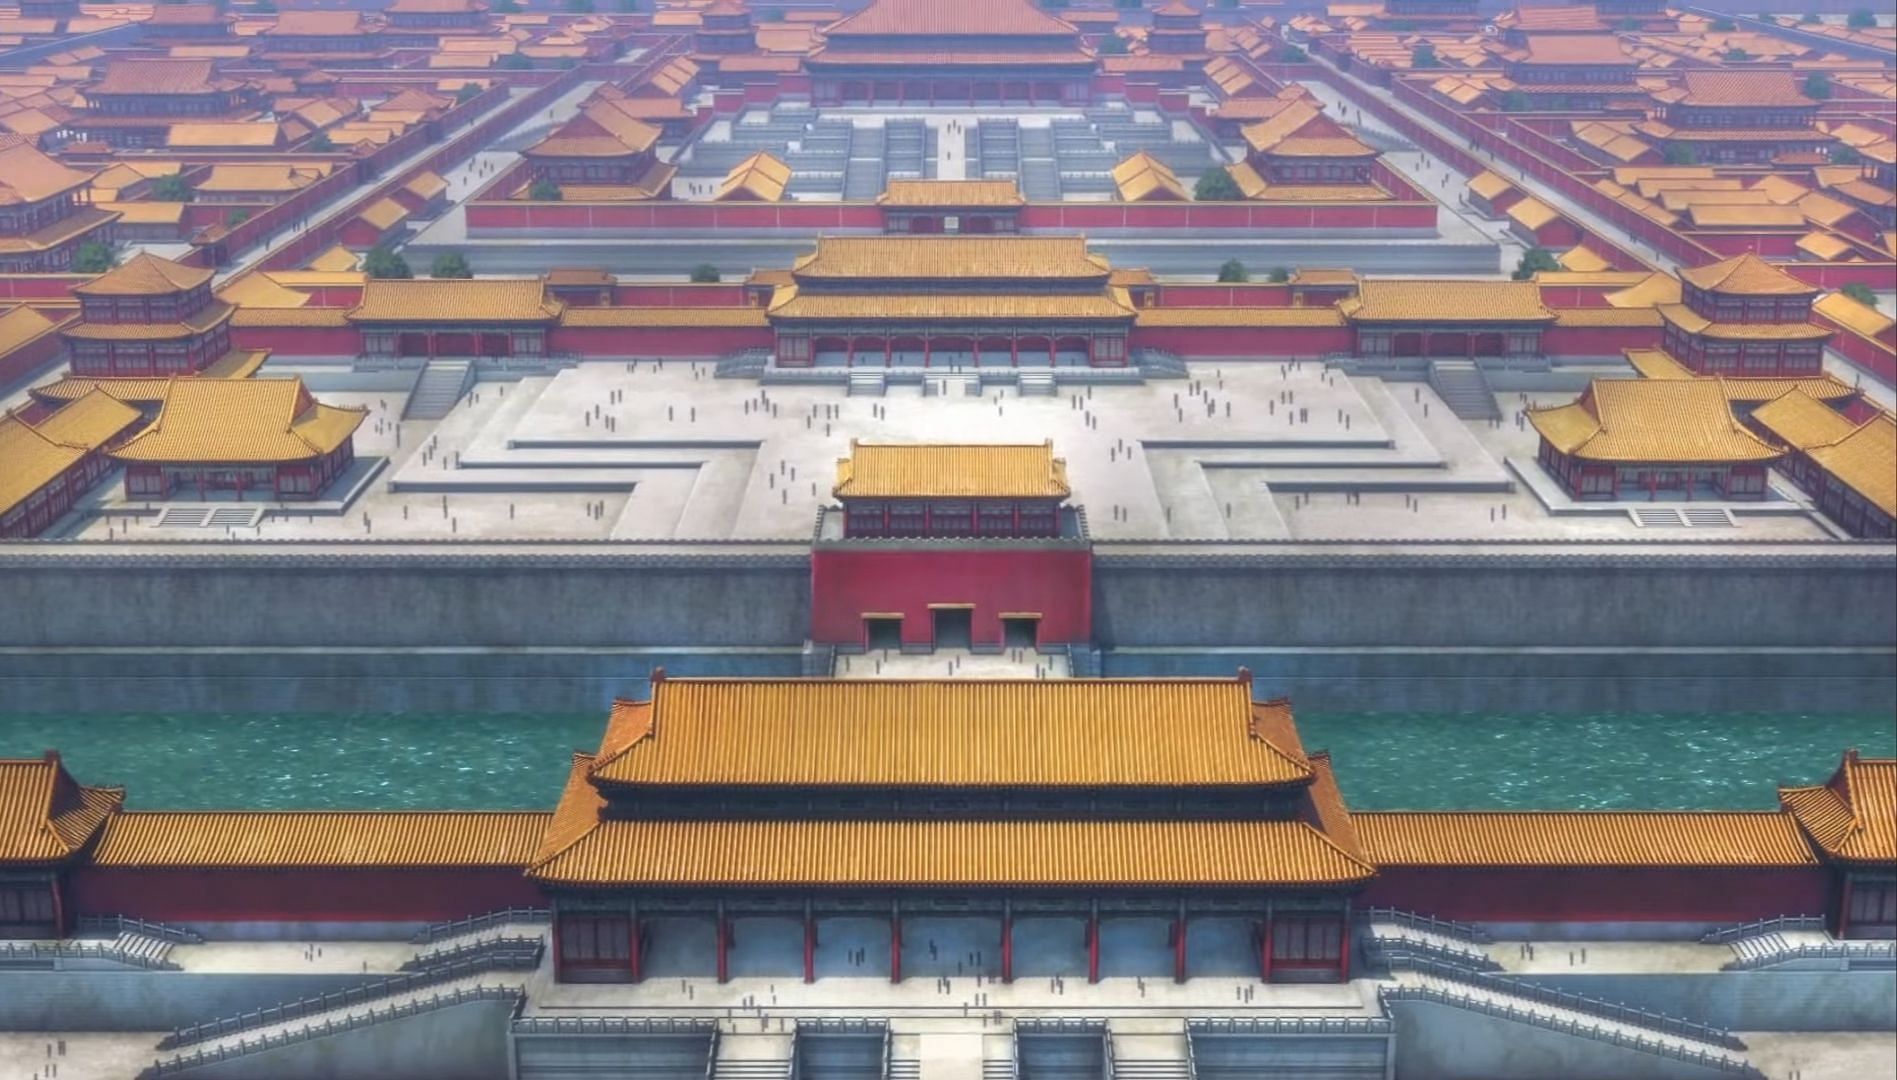 Layout of the Imperial Palace as seen in the anime (Image via TOHO Animation)